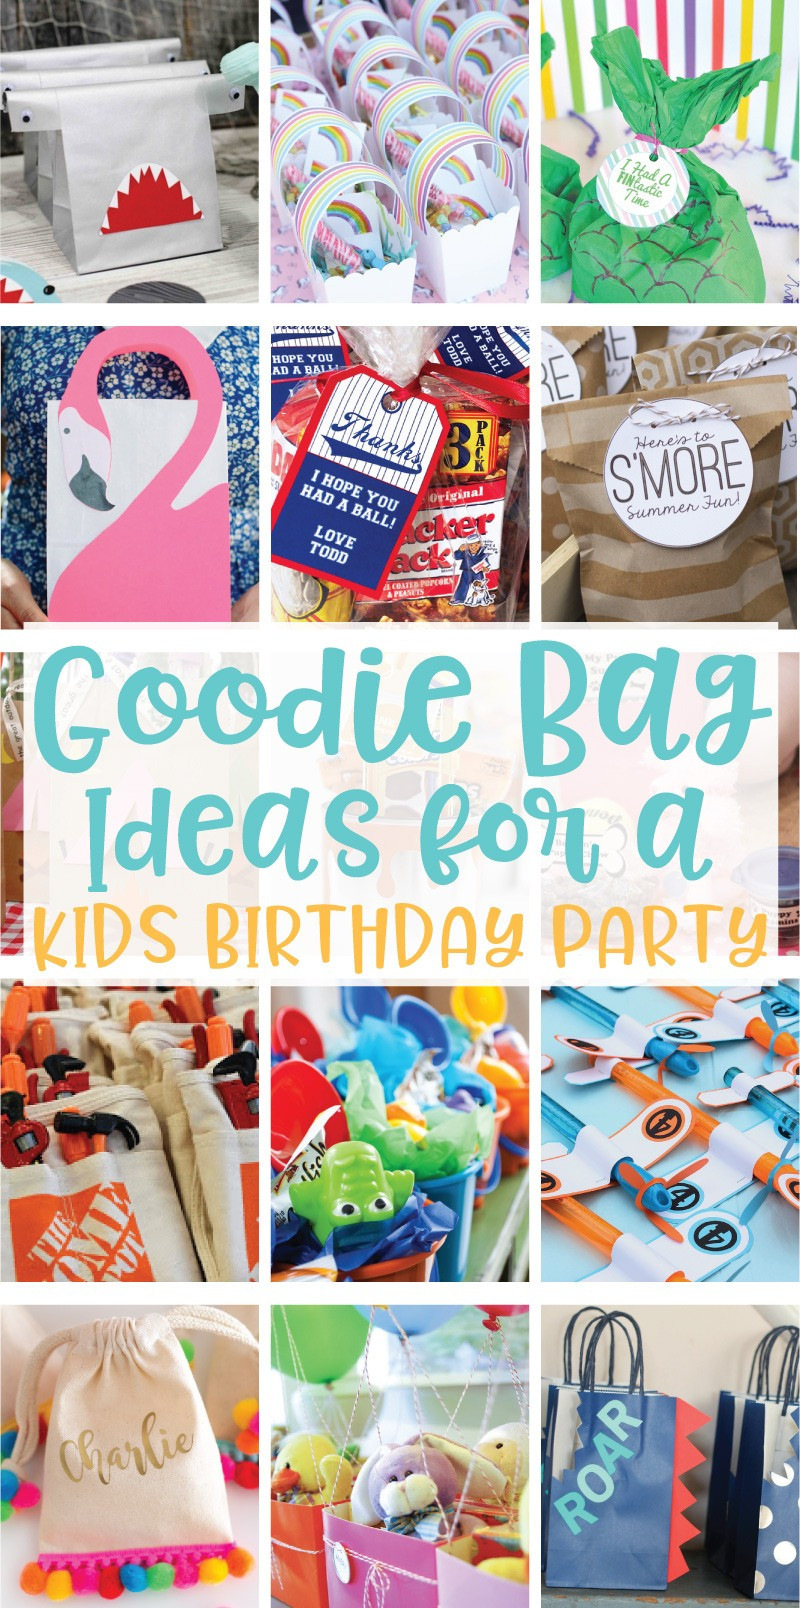 Unique Birthday Gifts For Kids
 20 Creative Goo Bag Ideas for Kids Birthday Parties on